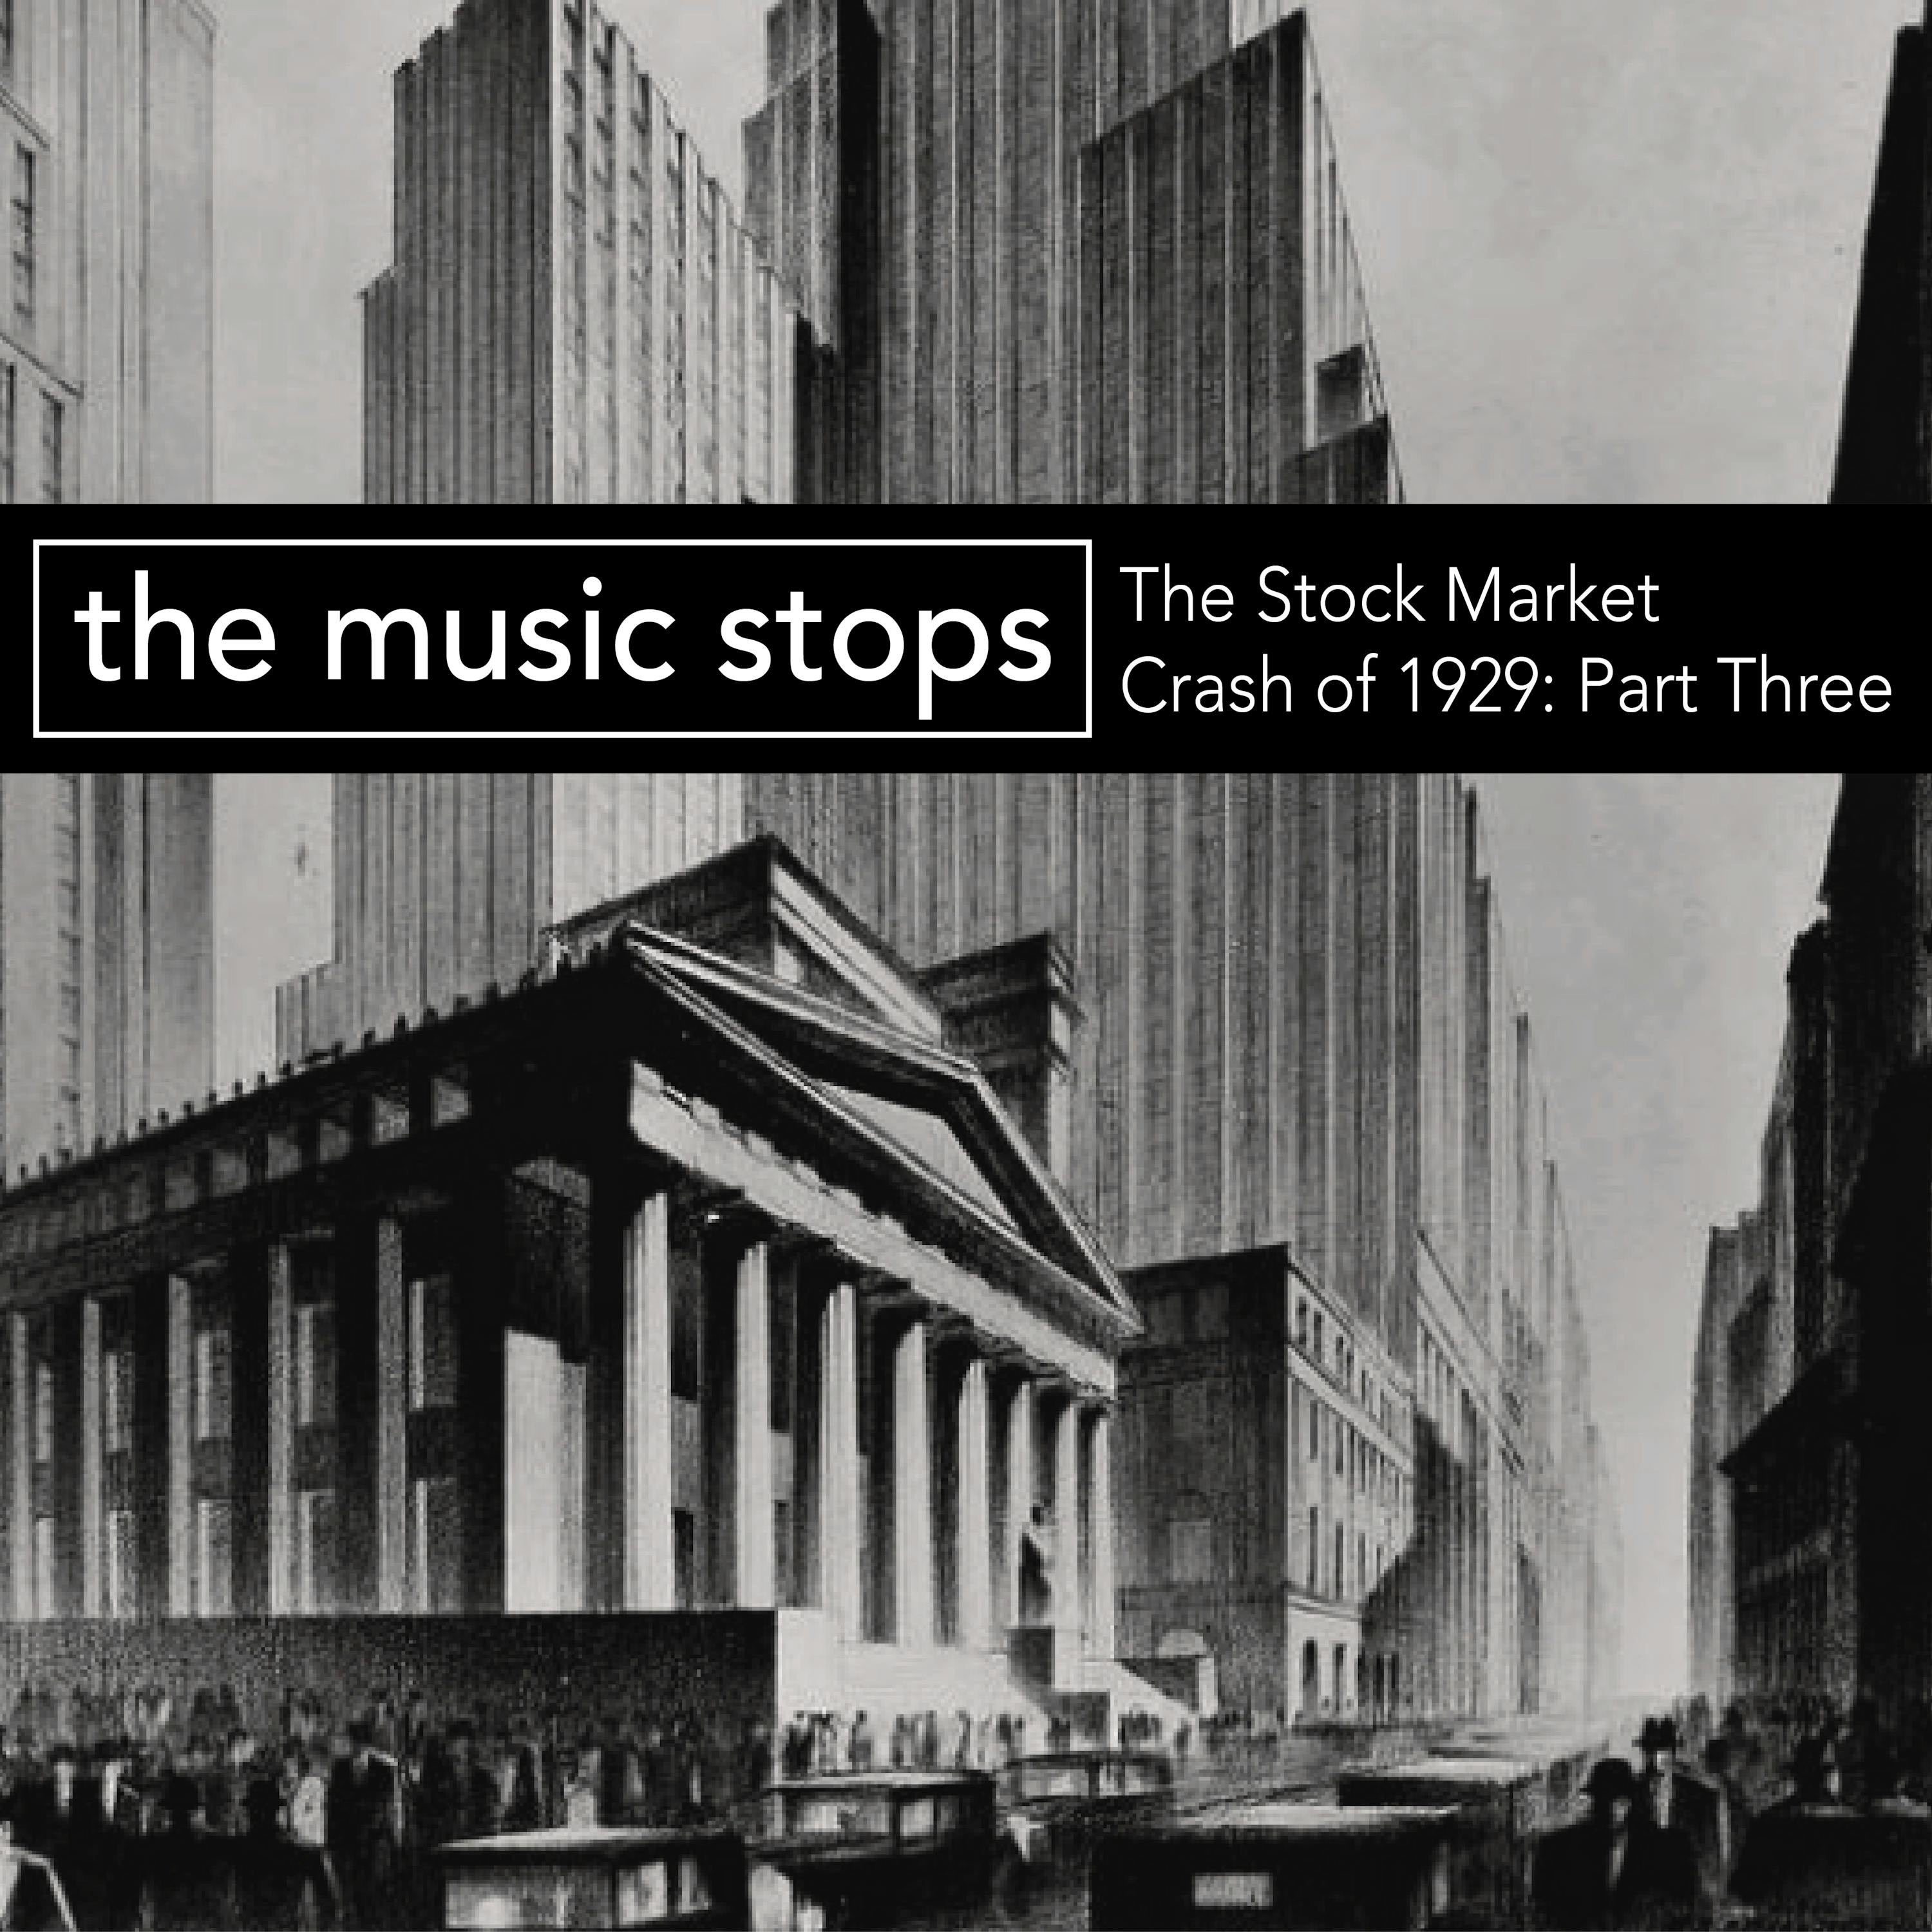 The Stock Market Crash of 1929 – Part 3: The Music Stops Image